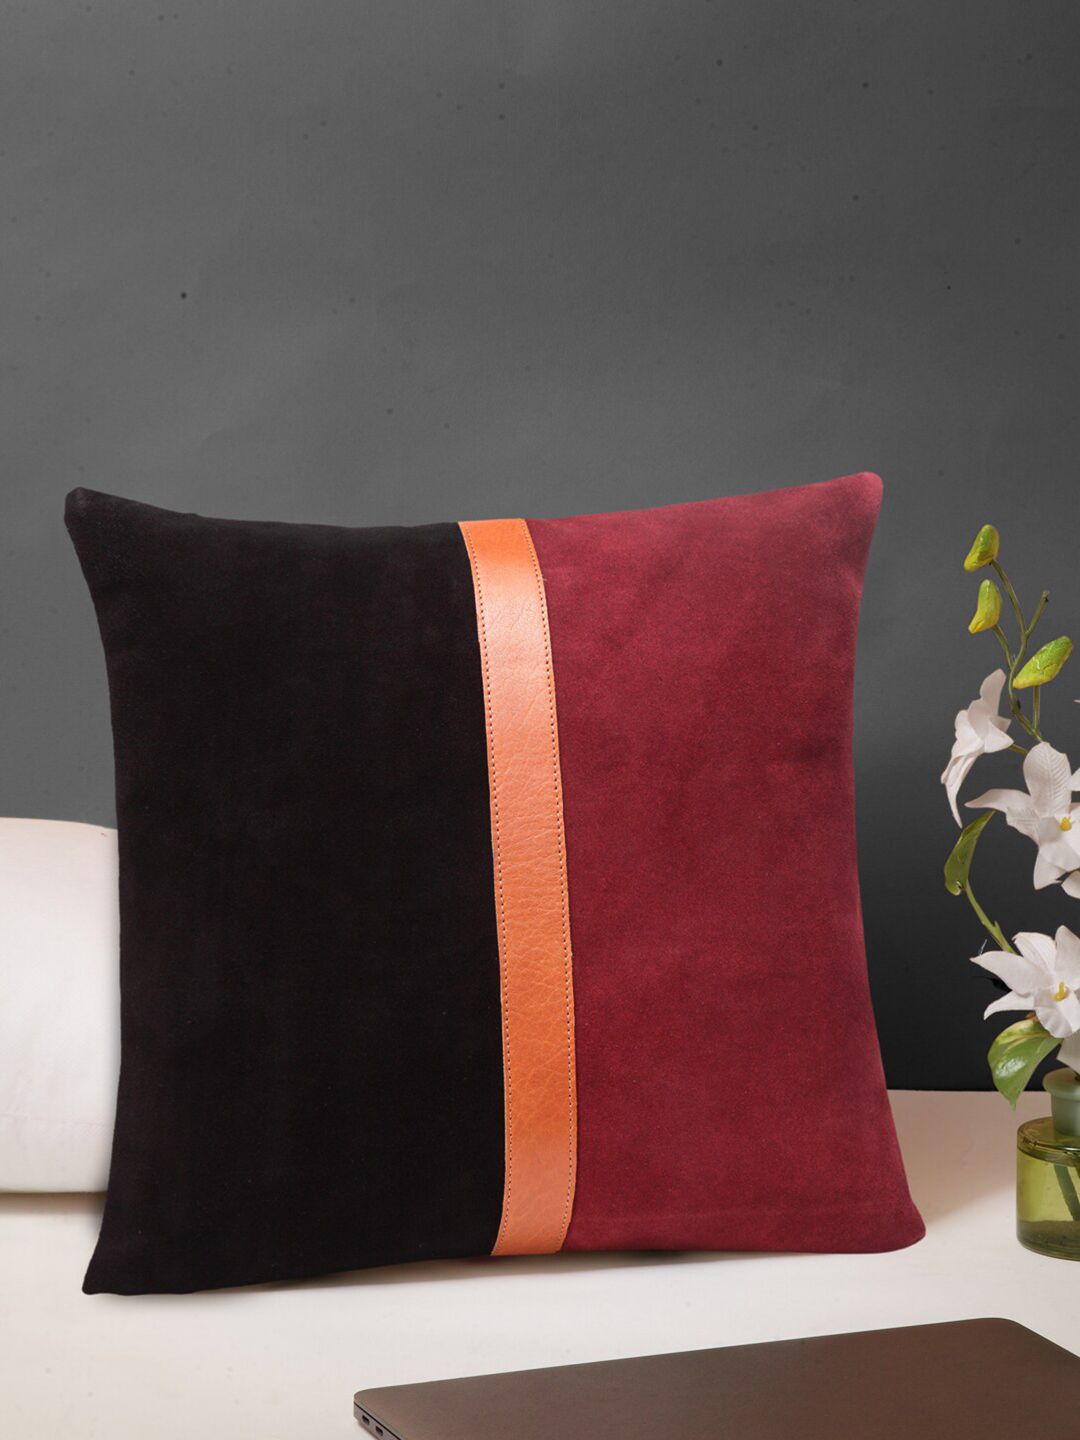 IMUR Black & Maroon Colourblocked Leather Square Cushion Cover Price in India